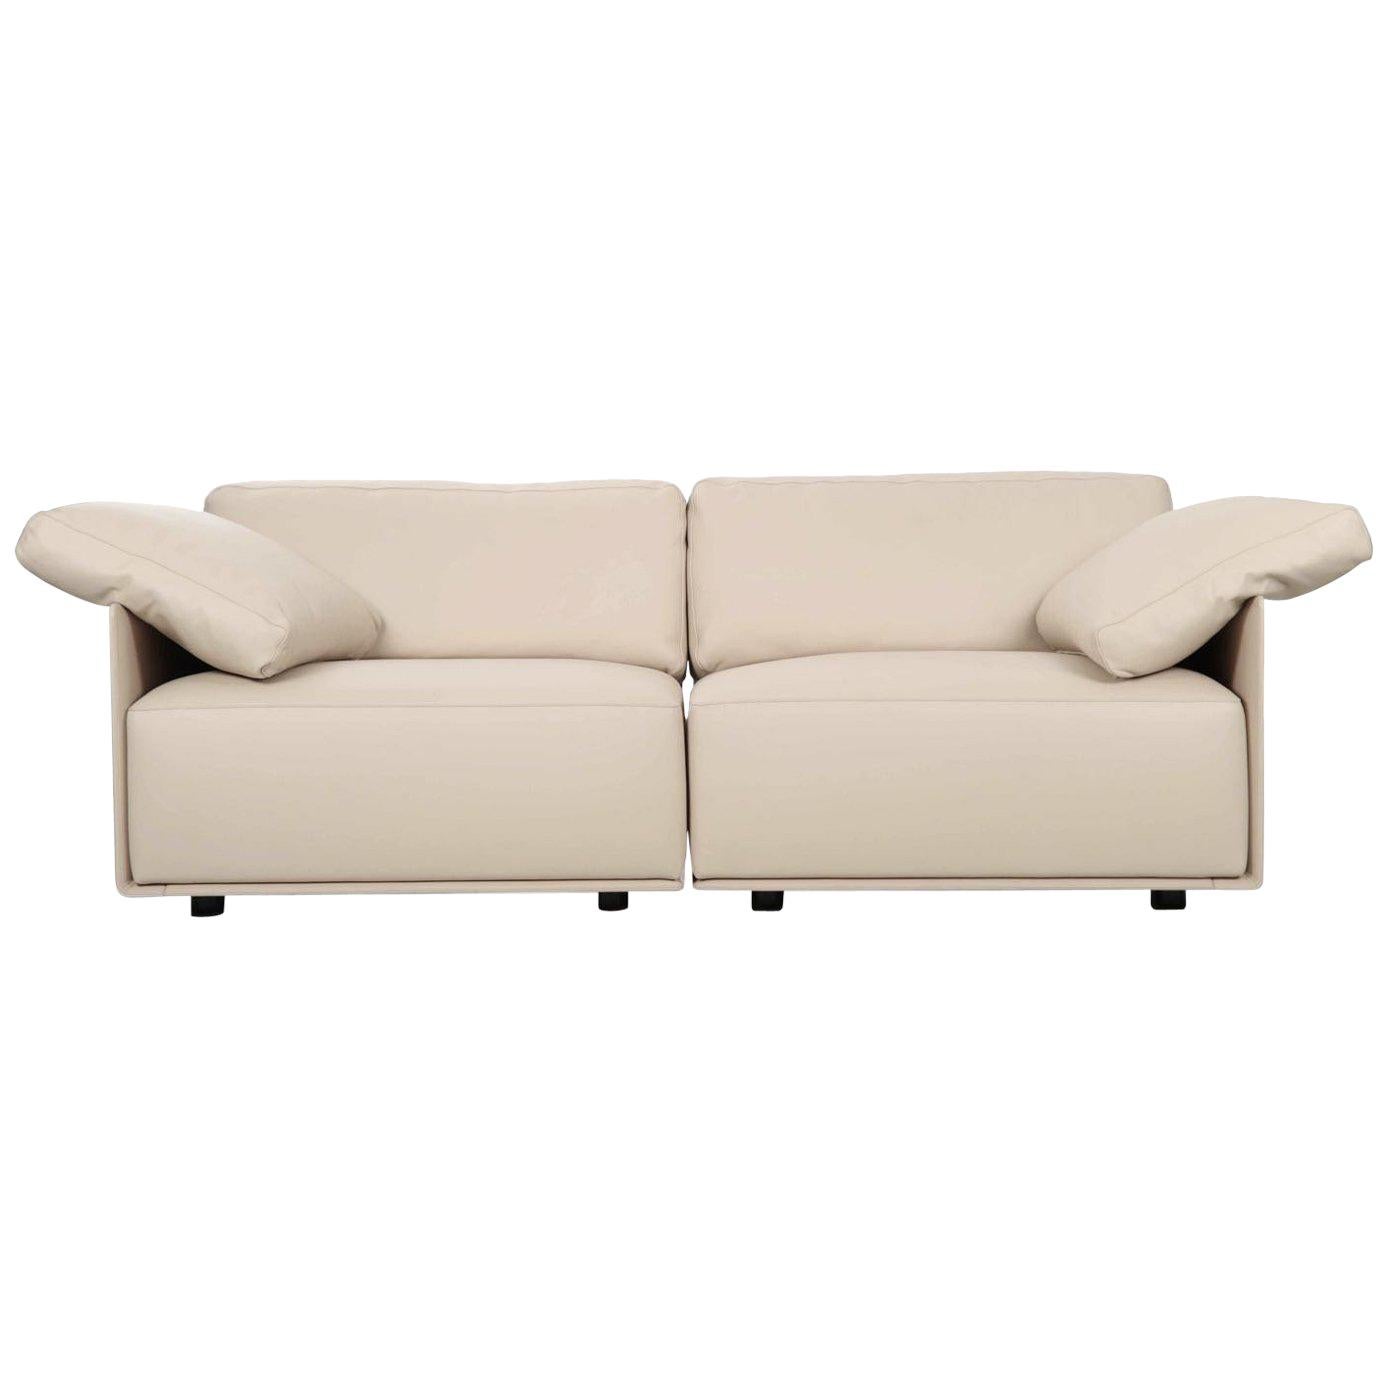 Leather Sectional Sofa "Cassiopea" by Lievore Altherr Molina for Poltrona Frau